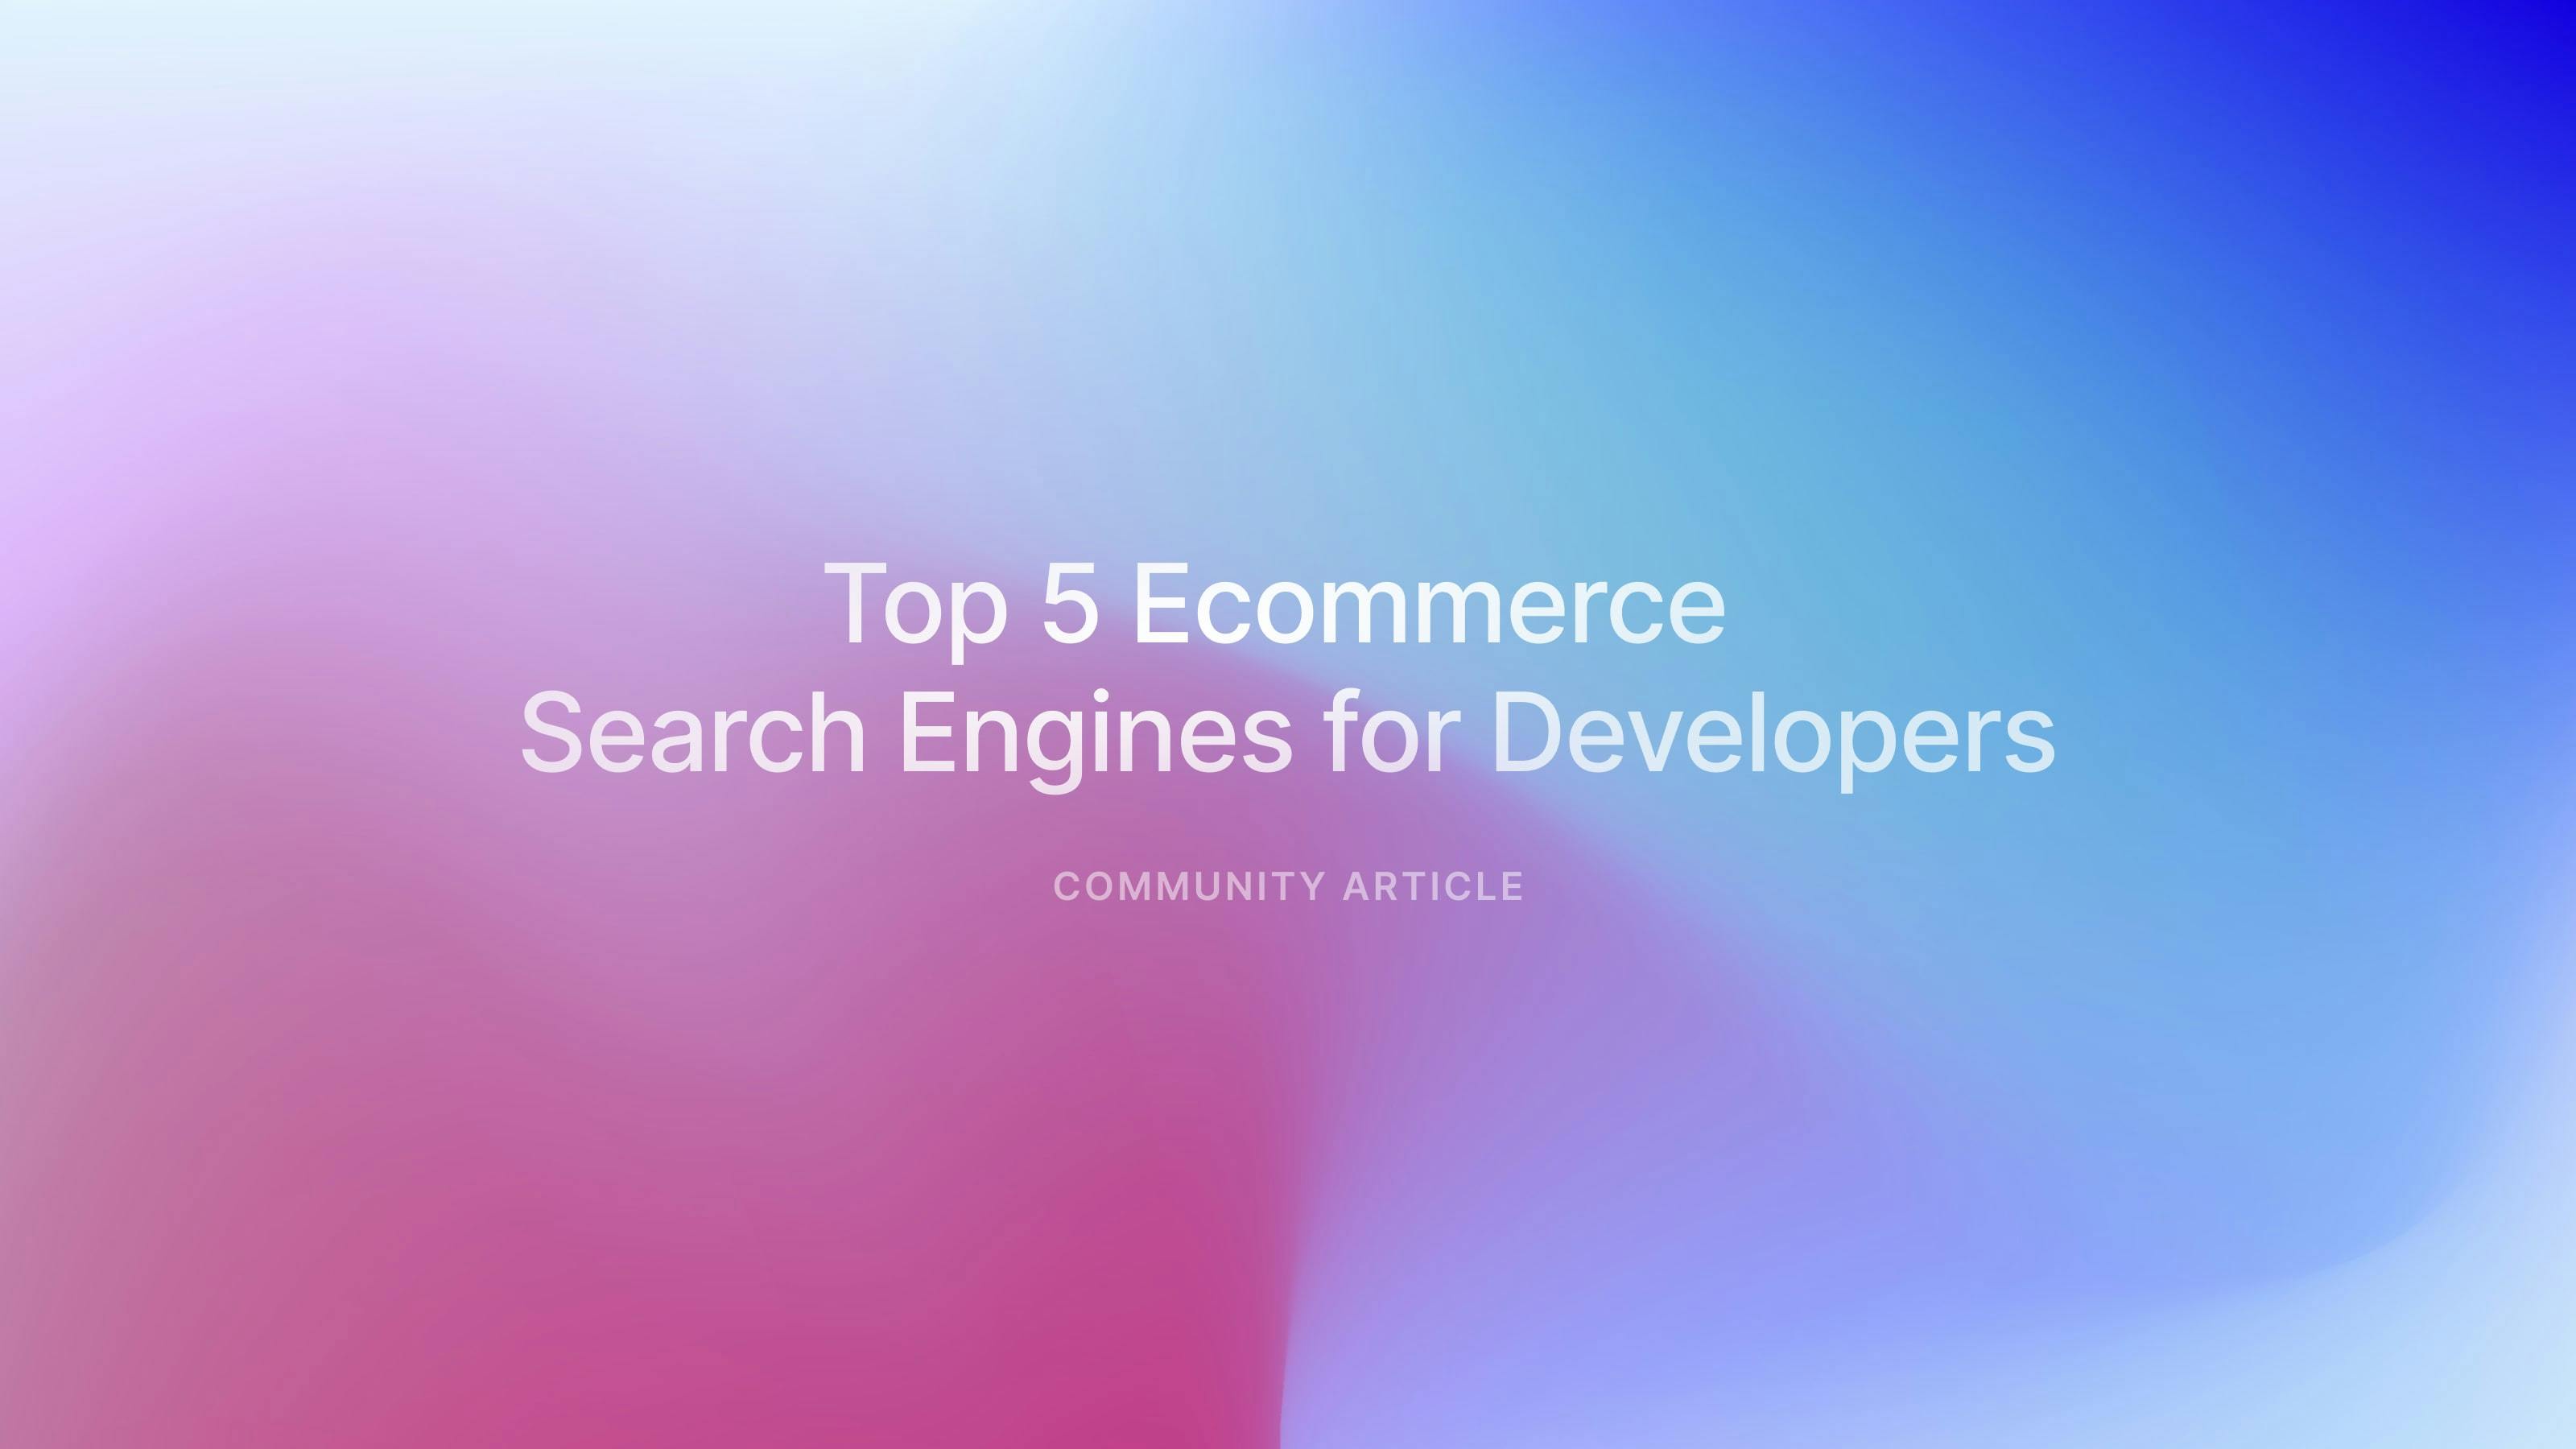 Top 5 Ecommerce Search Engines for Developers